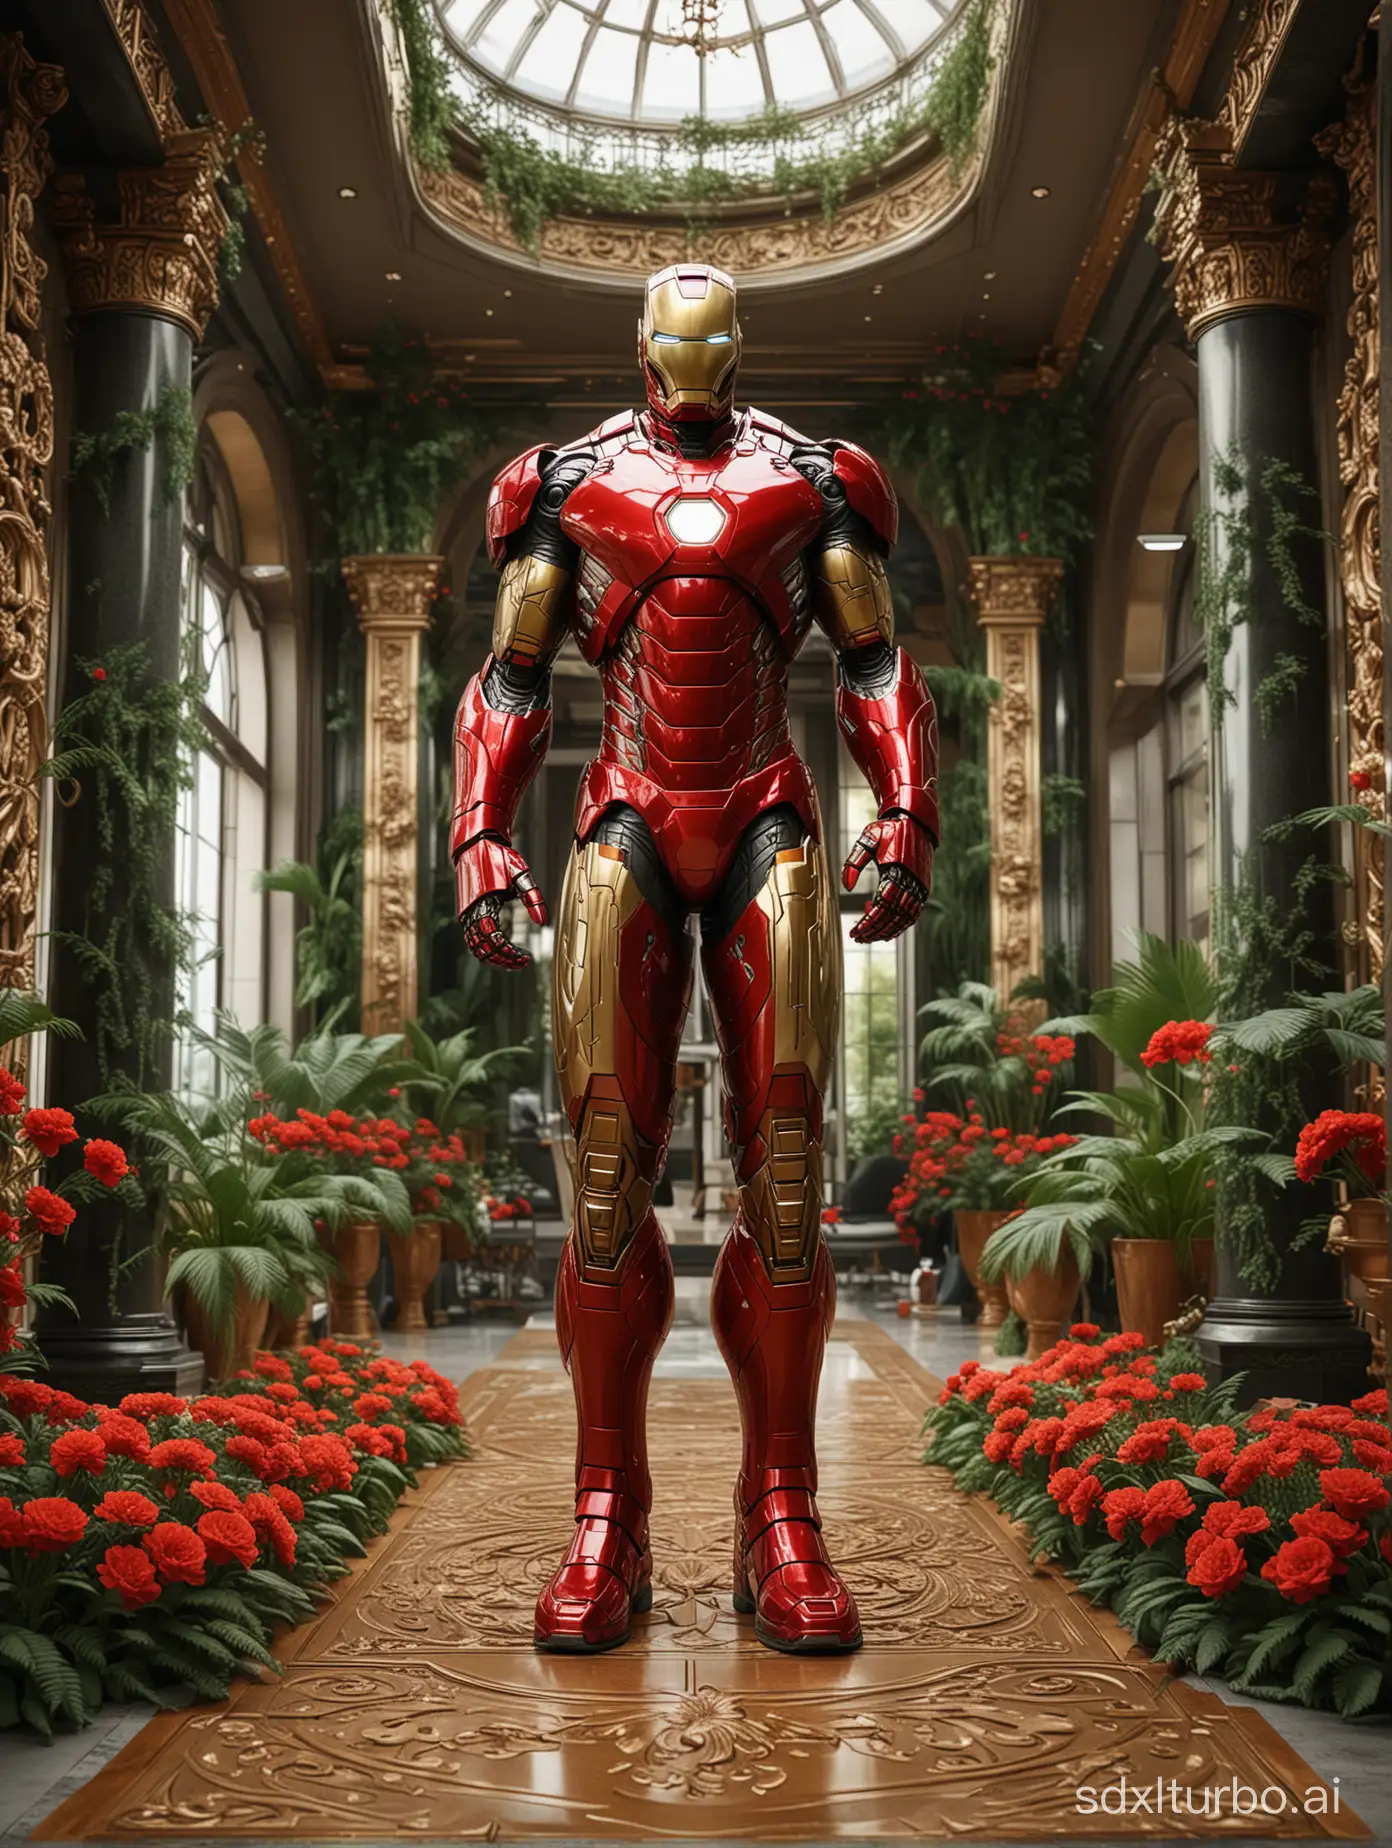 realistic image of an extravagant showroom with Ironman suit, with intricate carvings and intricate details, surrounded by the lush greenery of the landscape, modern, luxurious and exuberant mansion with GOLD details. Red flowers vegetation.